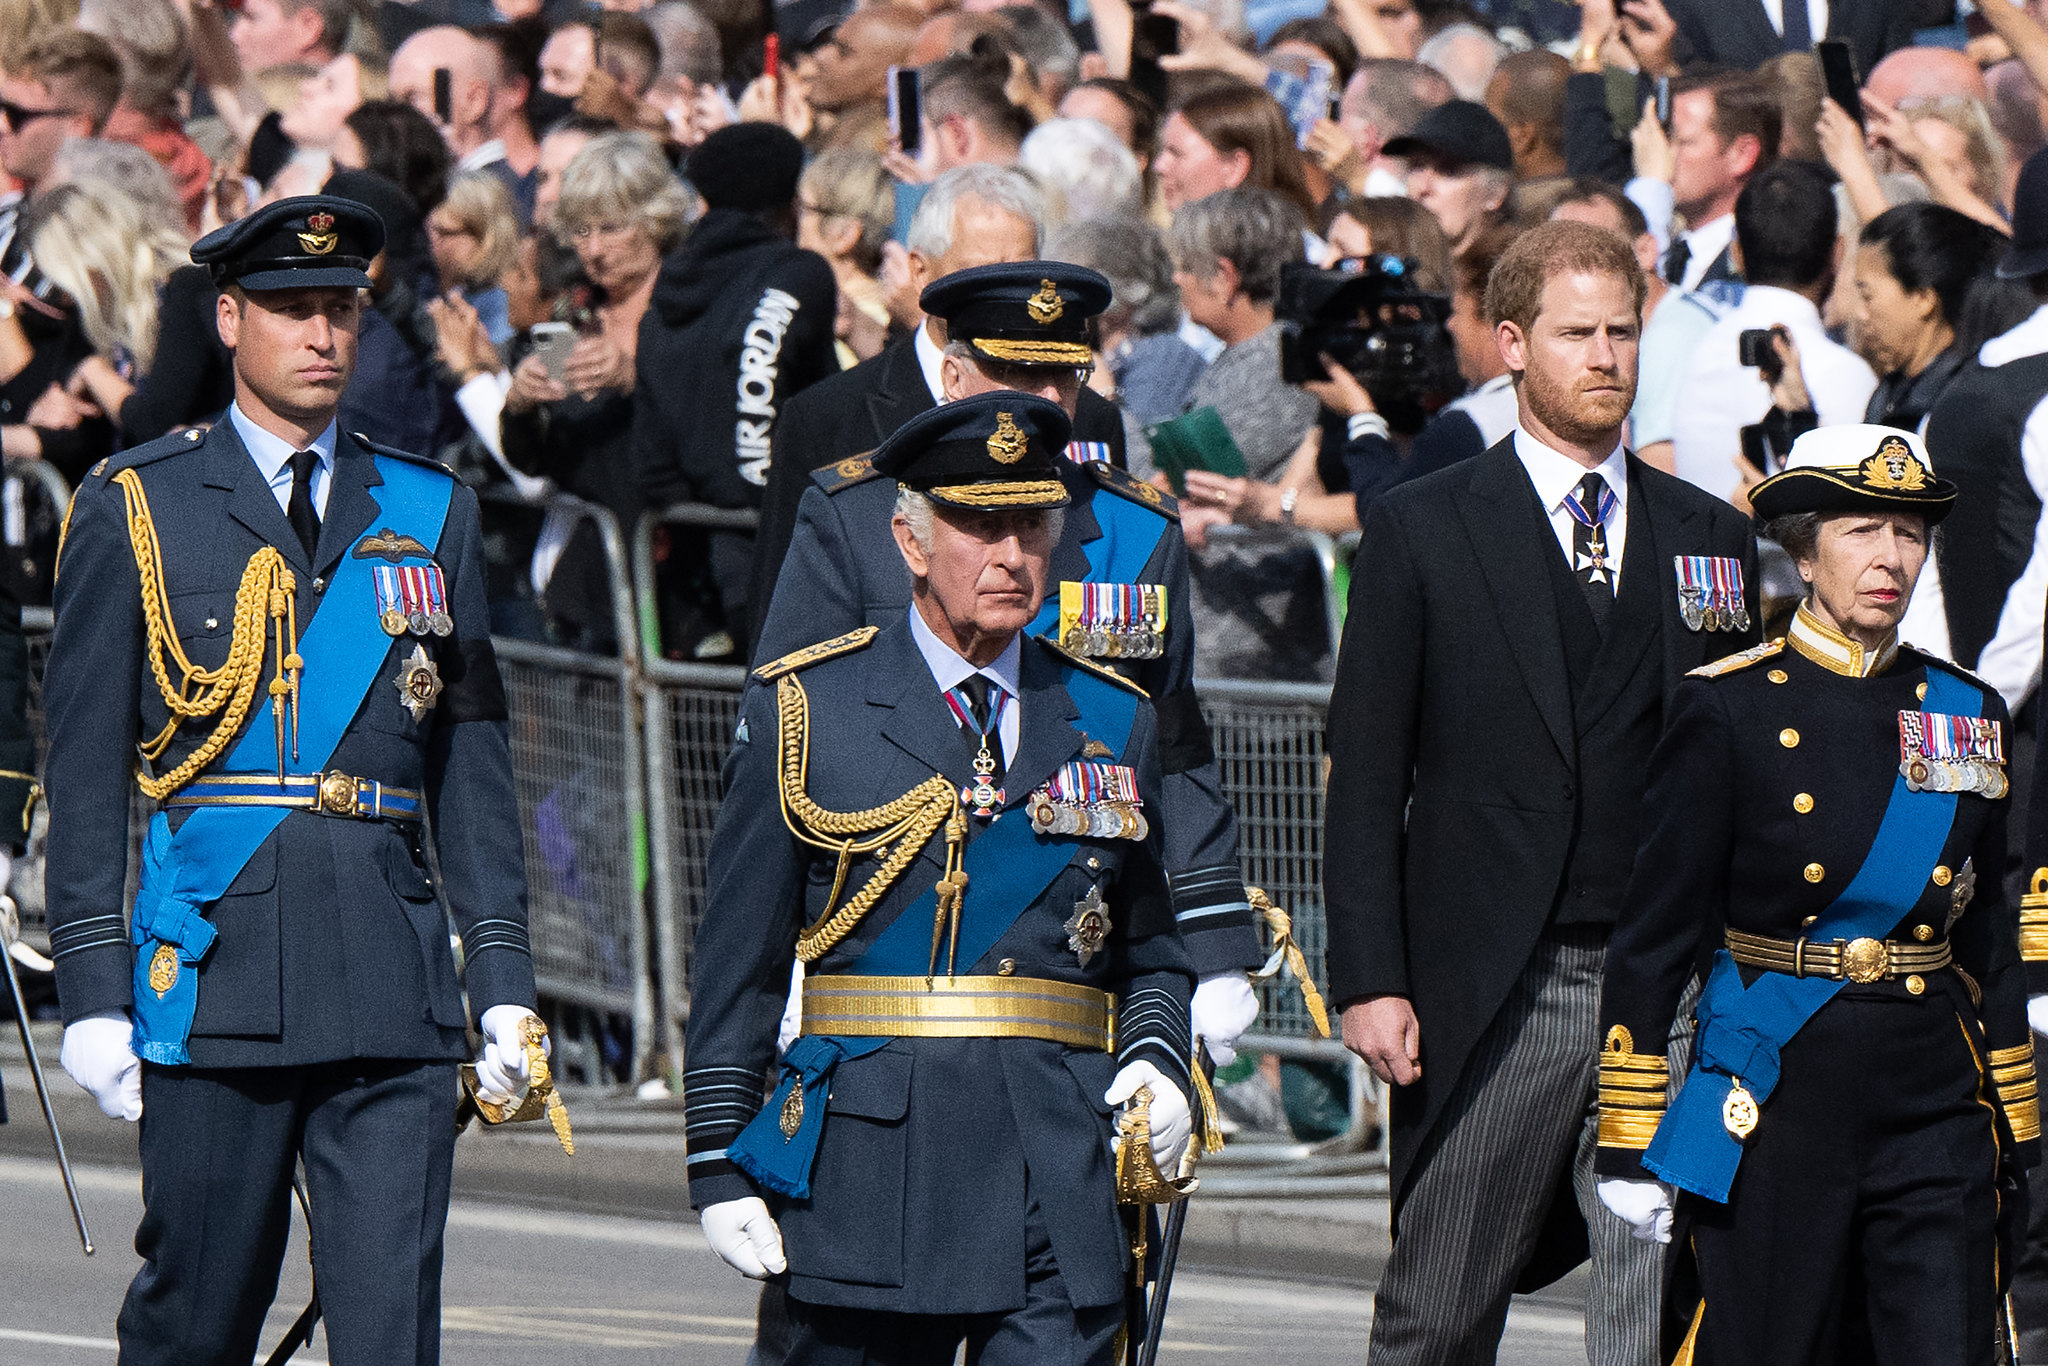 Ceremonial procession for the coffin of Queen Elizabeth II from Buckingham Palace to Westminster Hall, London © Mazur/cbcew.org.uk